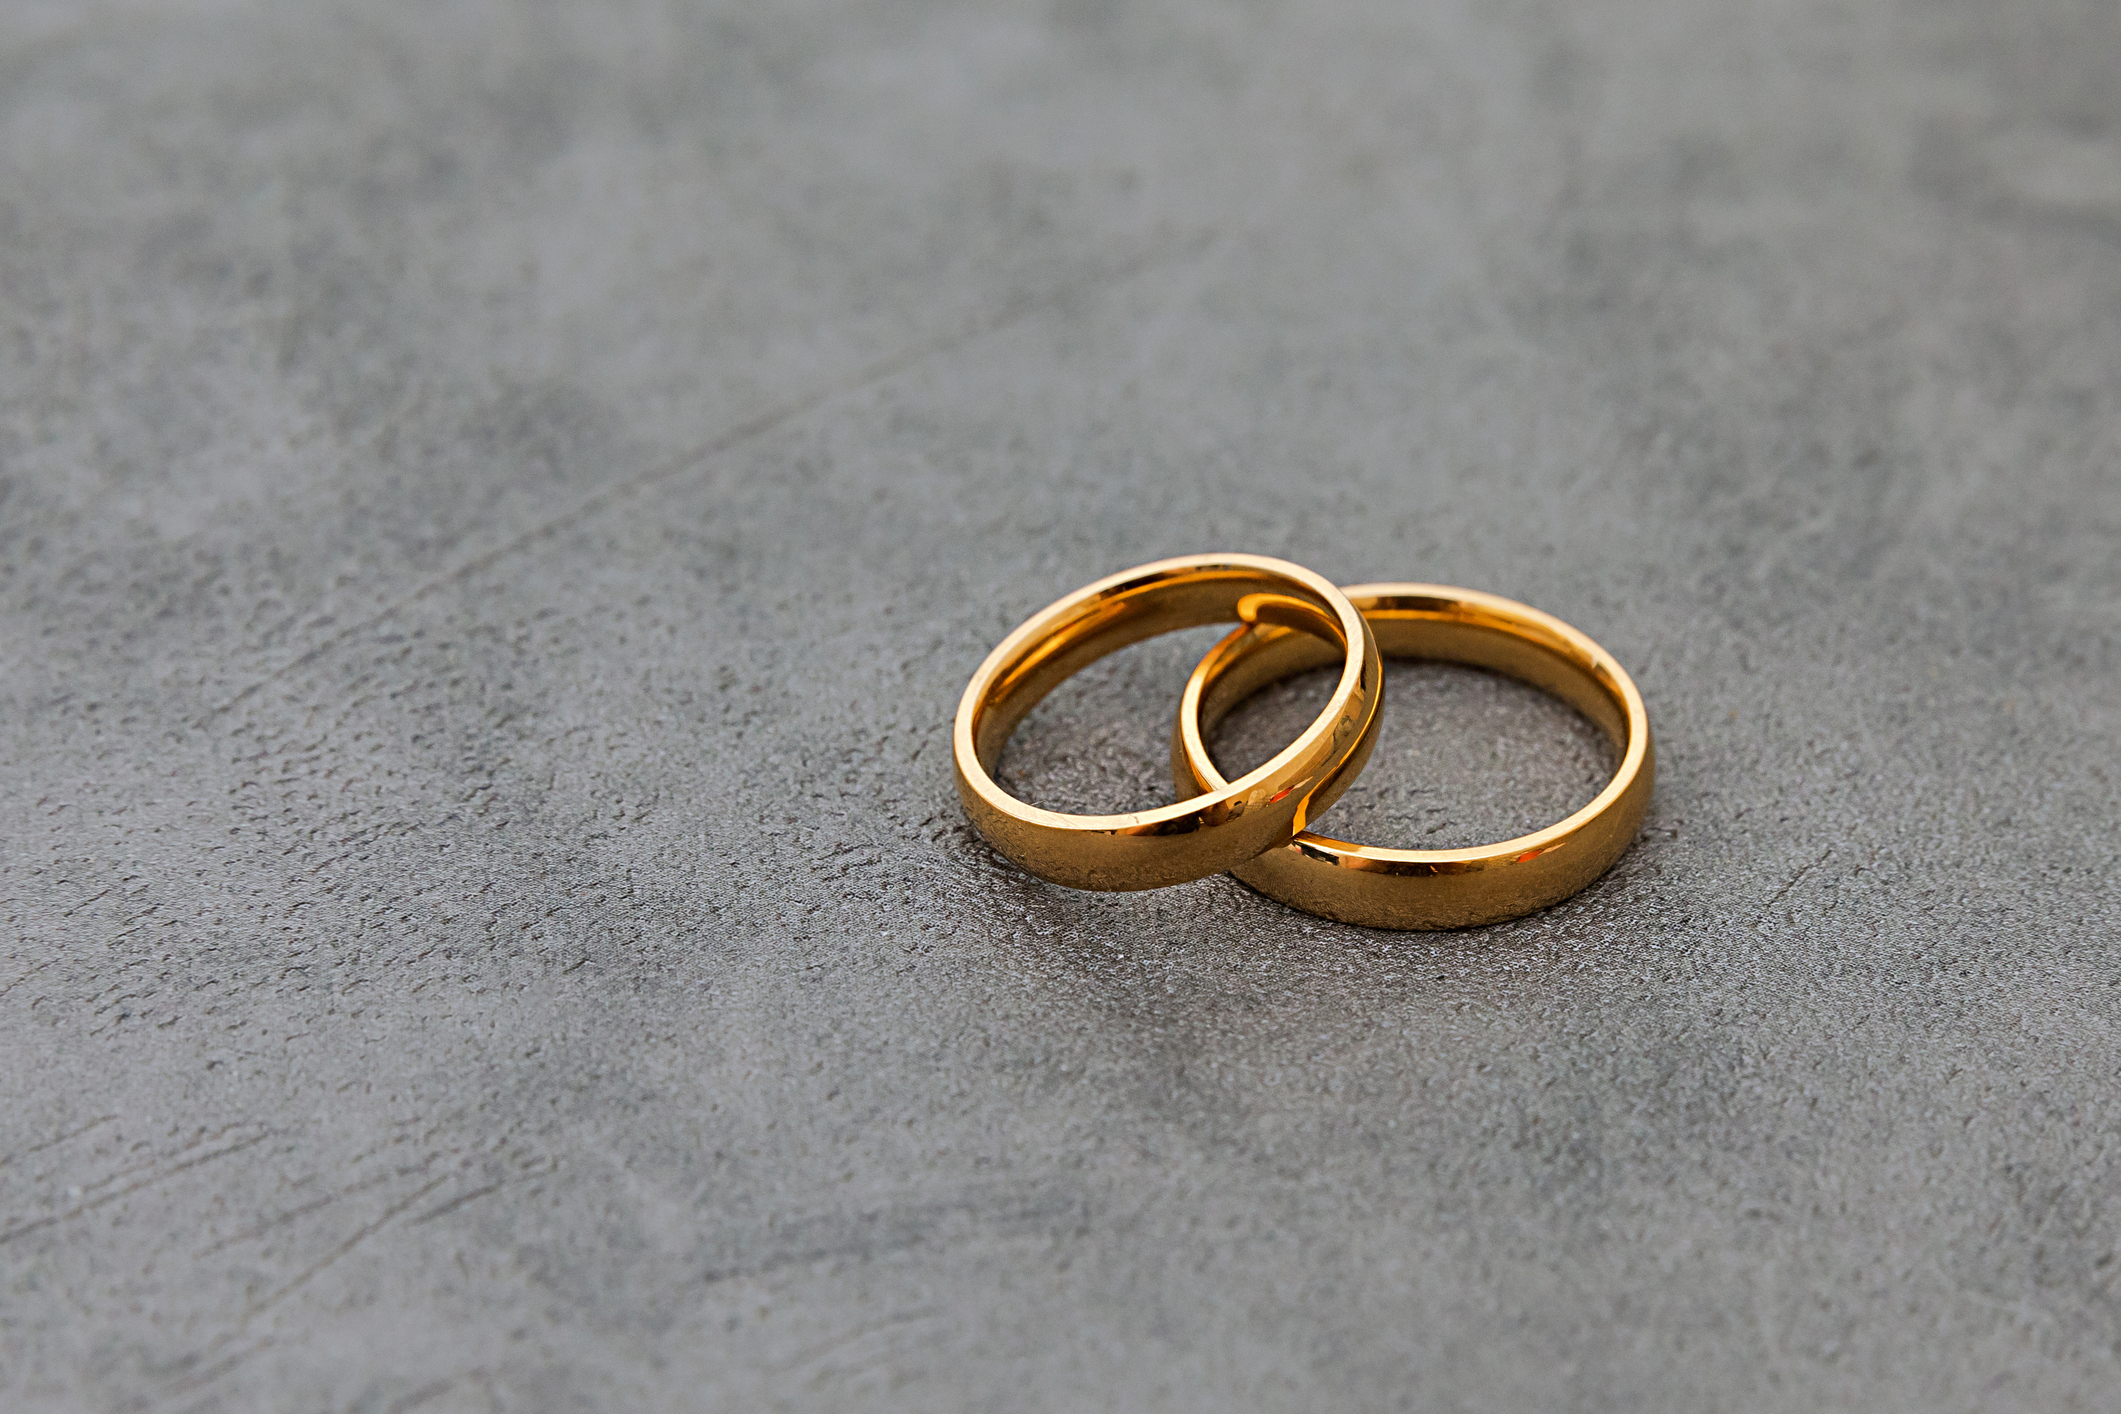 Two wedding bands intertwined on a textured surface